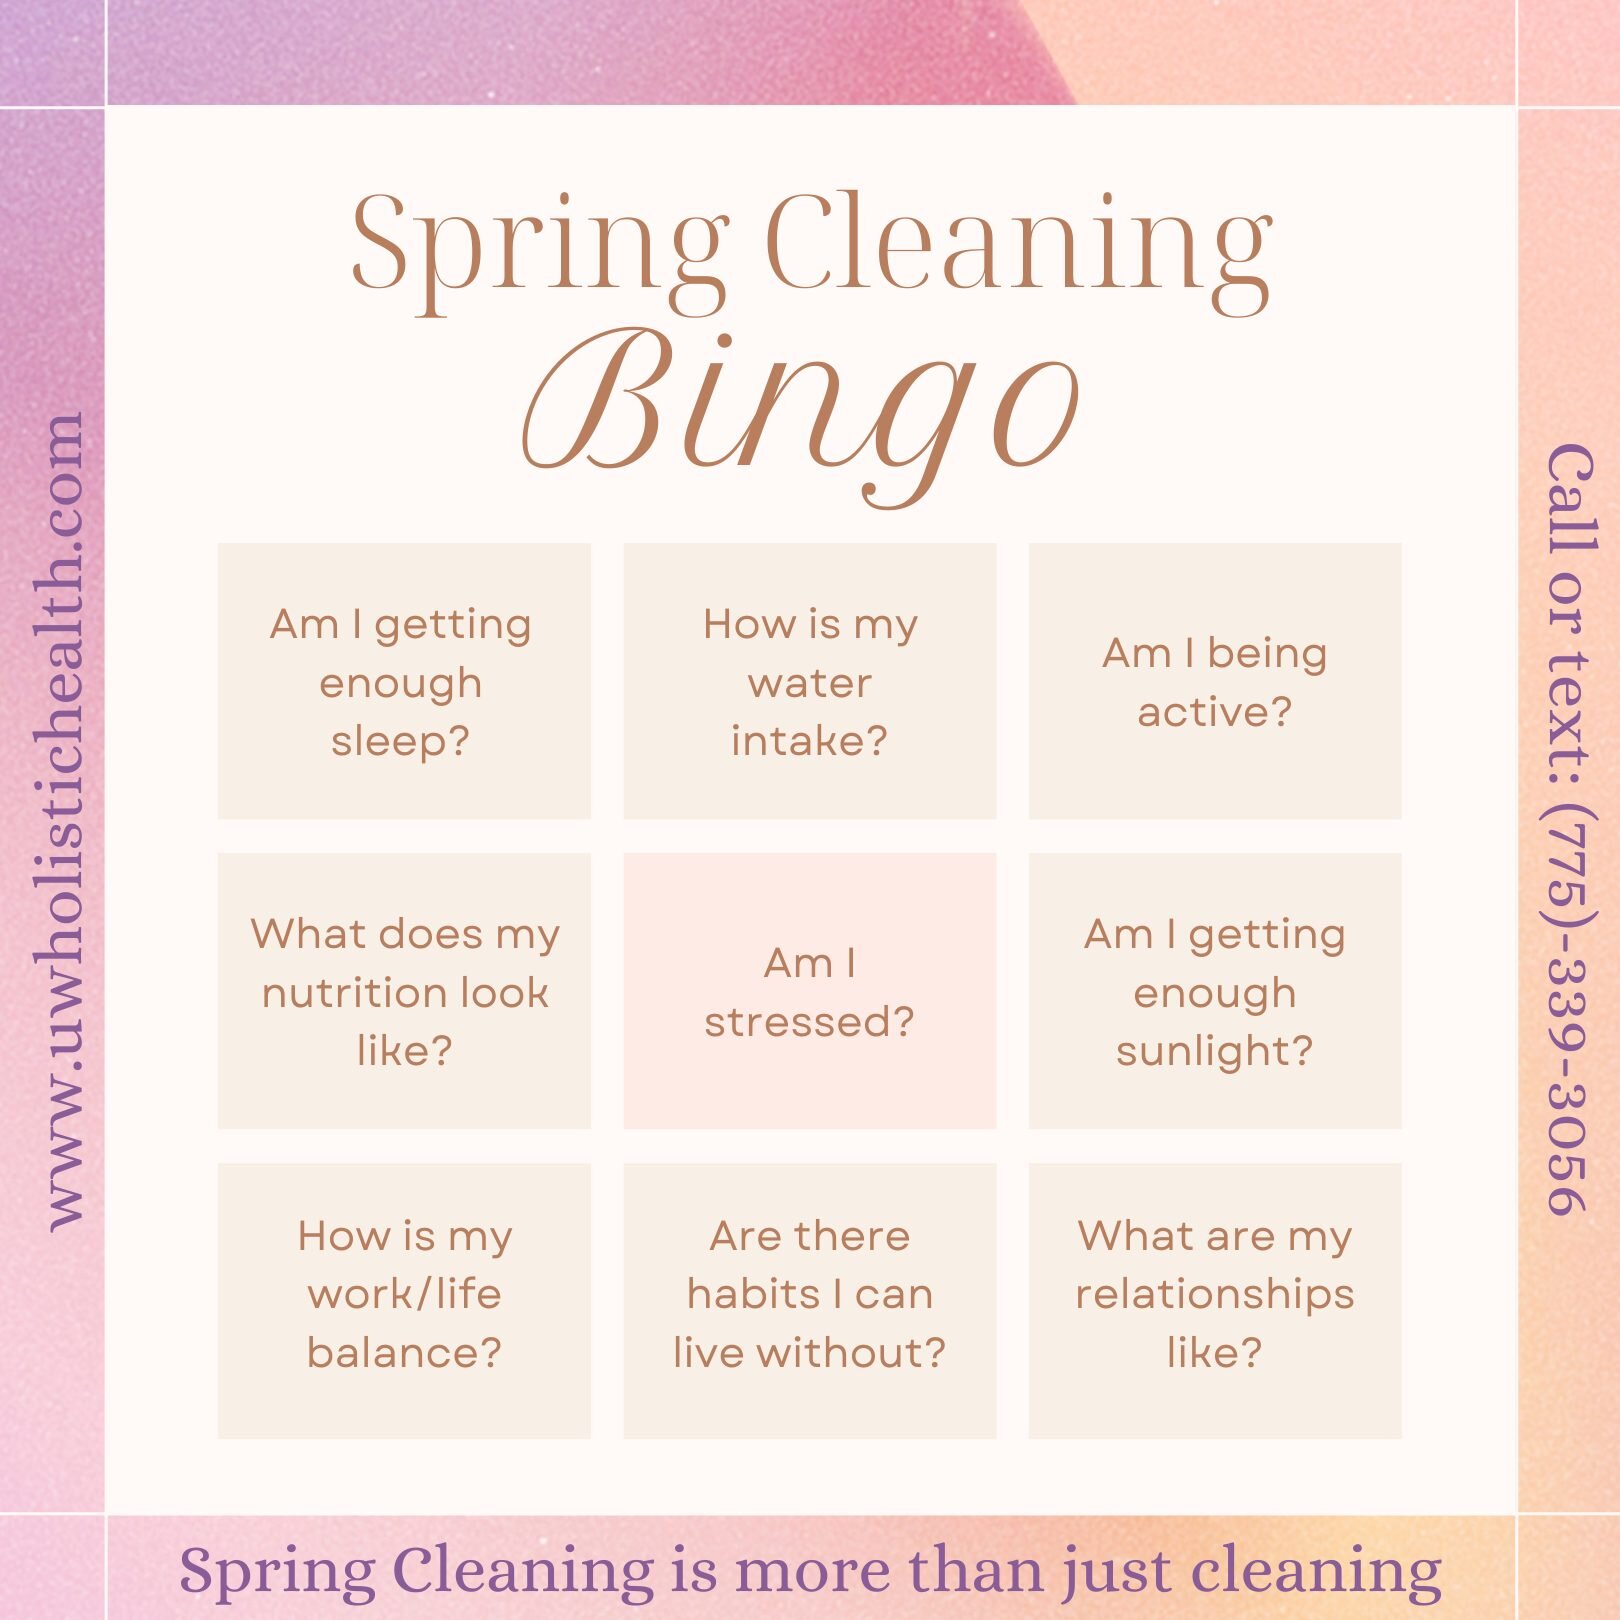 Spring cleaning is more than just cleaning. And now that spring has sprung, what can you do to clean up your well being? #springhassprung #springcleaning #mentalhealthmatters #holistichealth 

Call or text us today to discuss how you can improve your